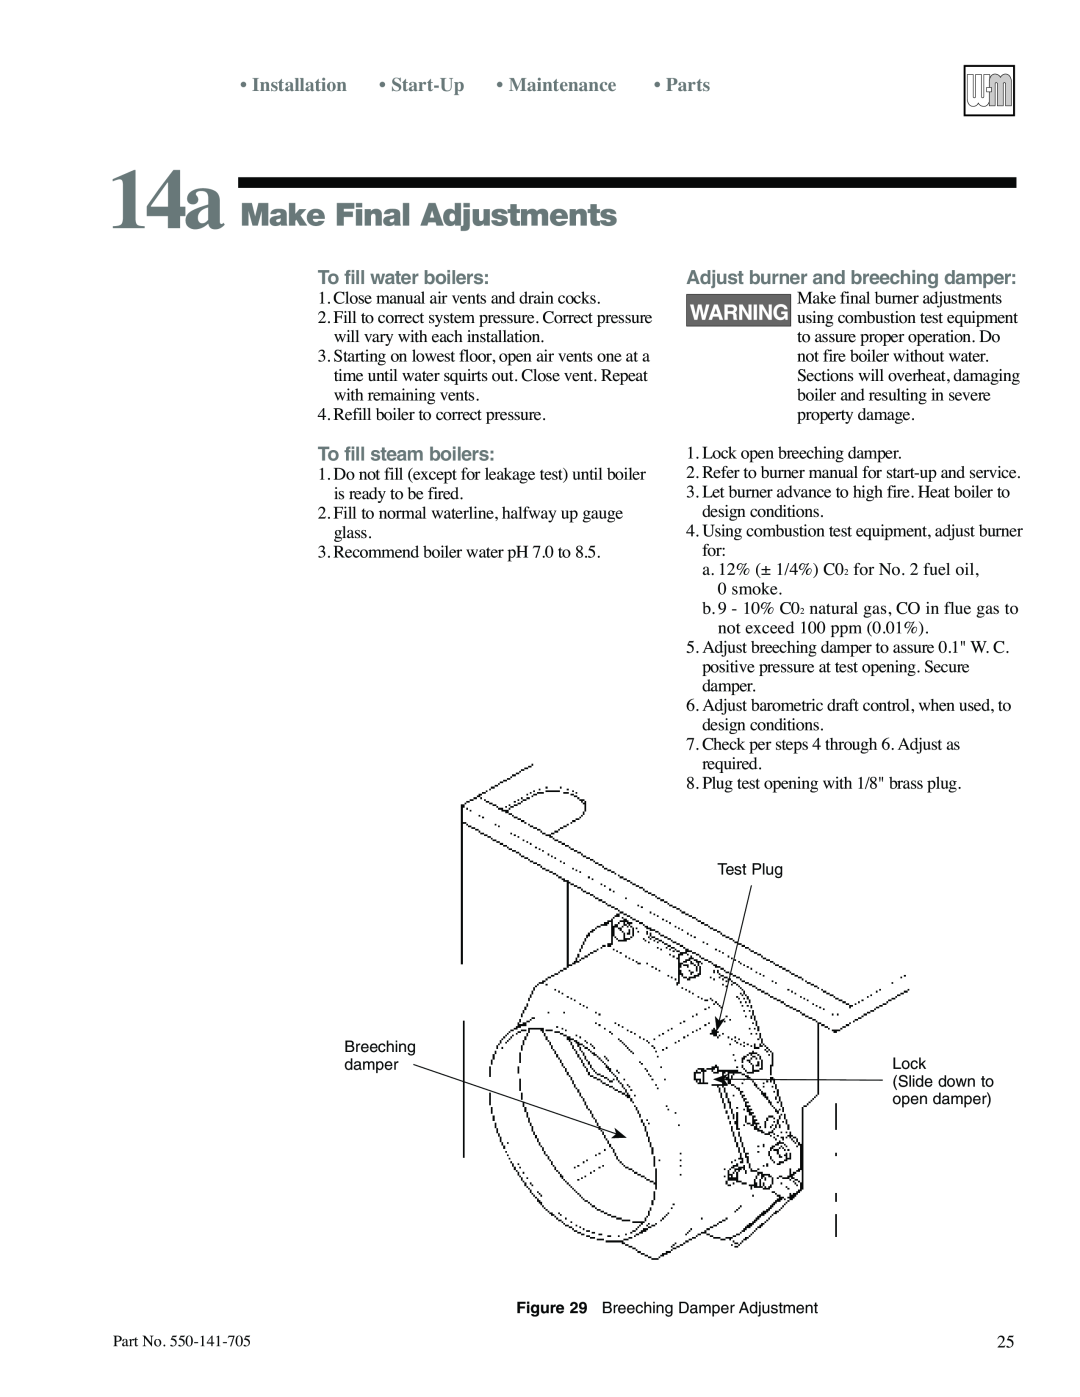 Weil-McLain 78 manual 14a Make Final Adjustments, Installation, • Start-Up, Maintenance, To fill water boilers, Parts 